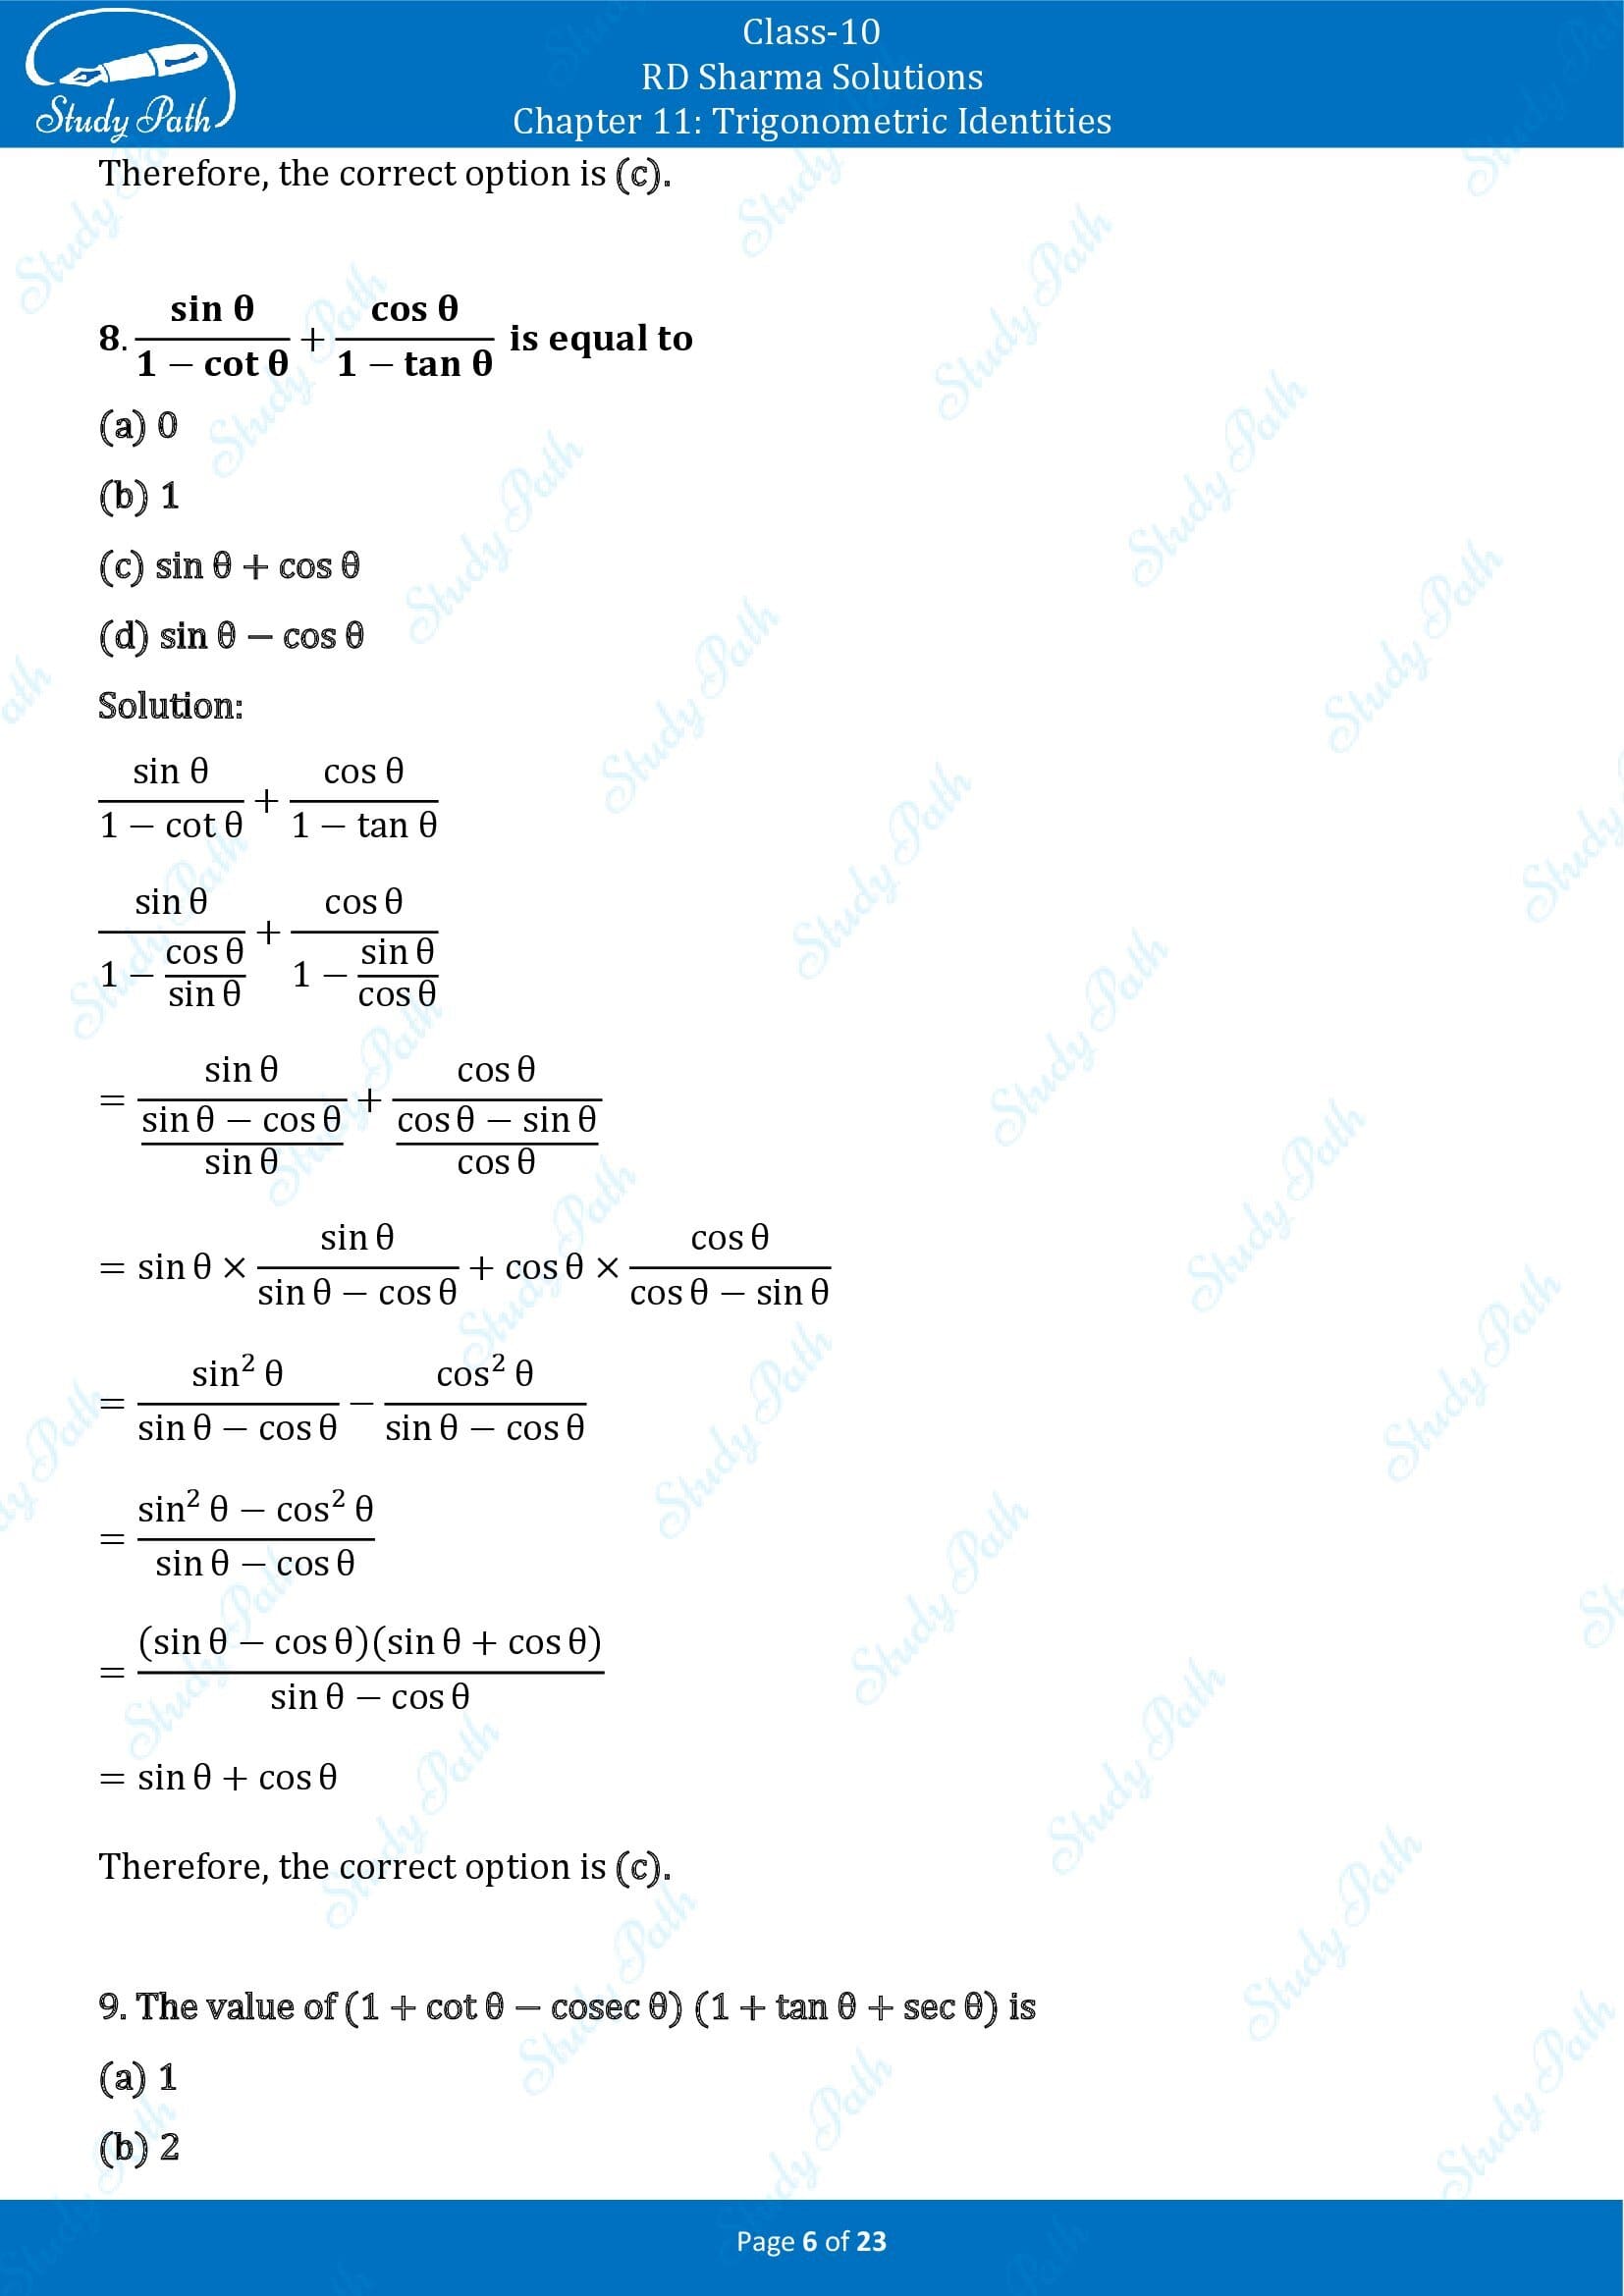 RD Sharma Solutions Class 10 Chapter 11 Trigonometric Identities Multiple Choice Questions MCQs 00006